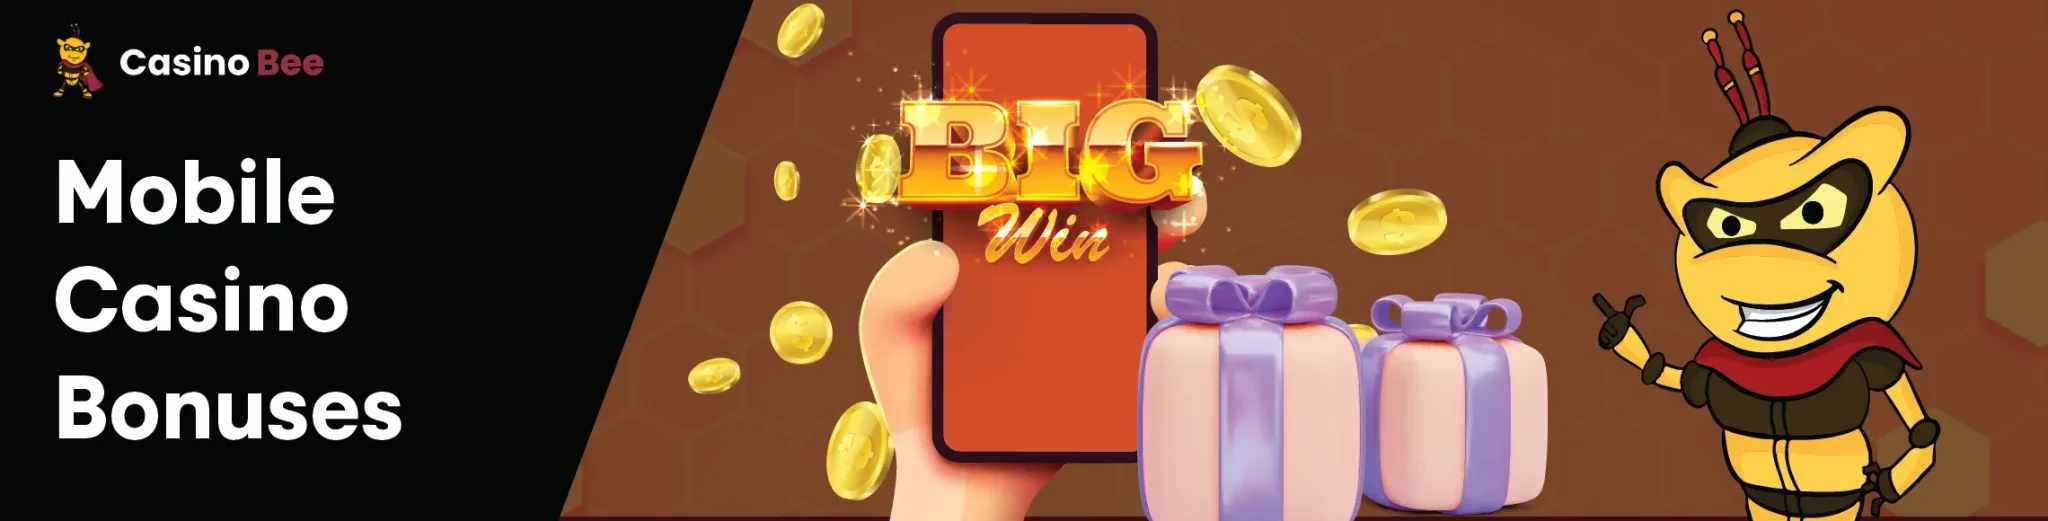 Discover Amazing Bonuses on Mobile Casino Websites and Apps
